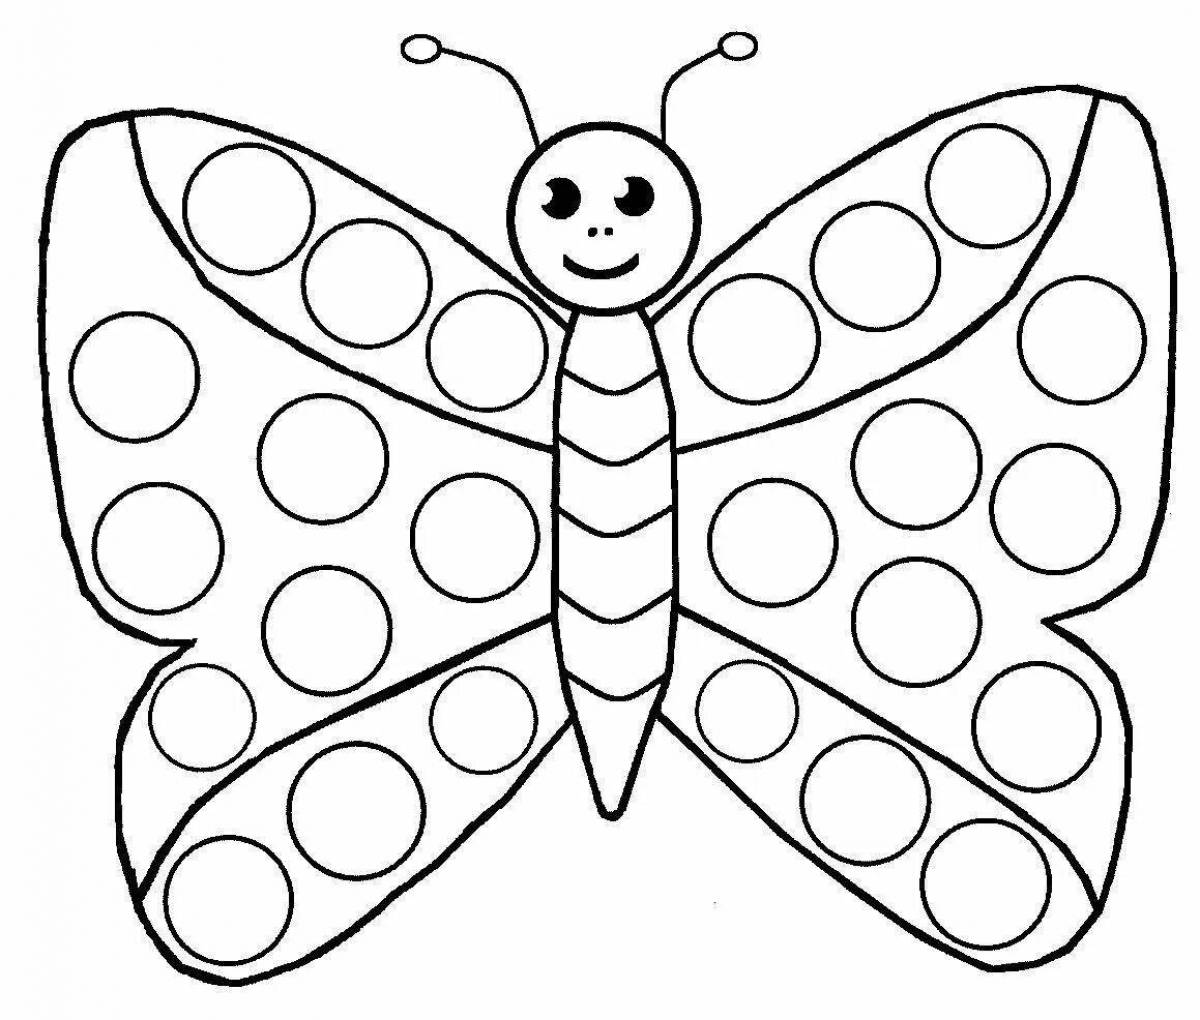 Joyful coloring pages for children 6-7 years old